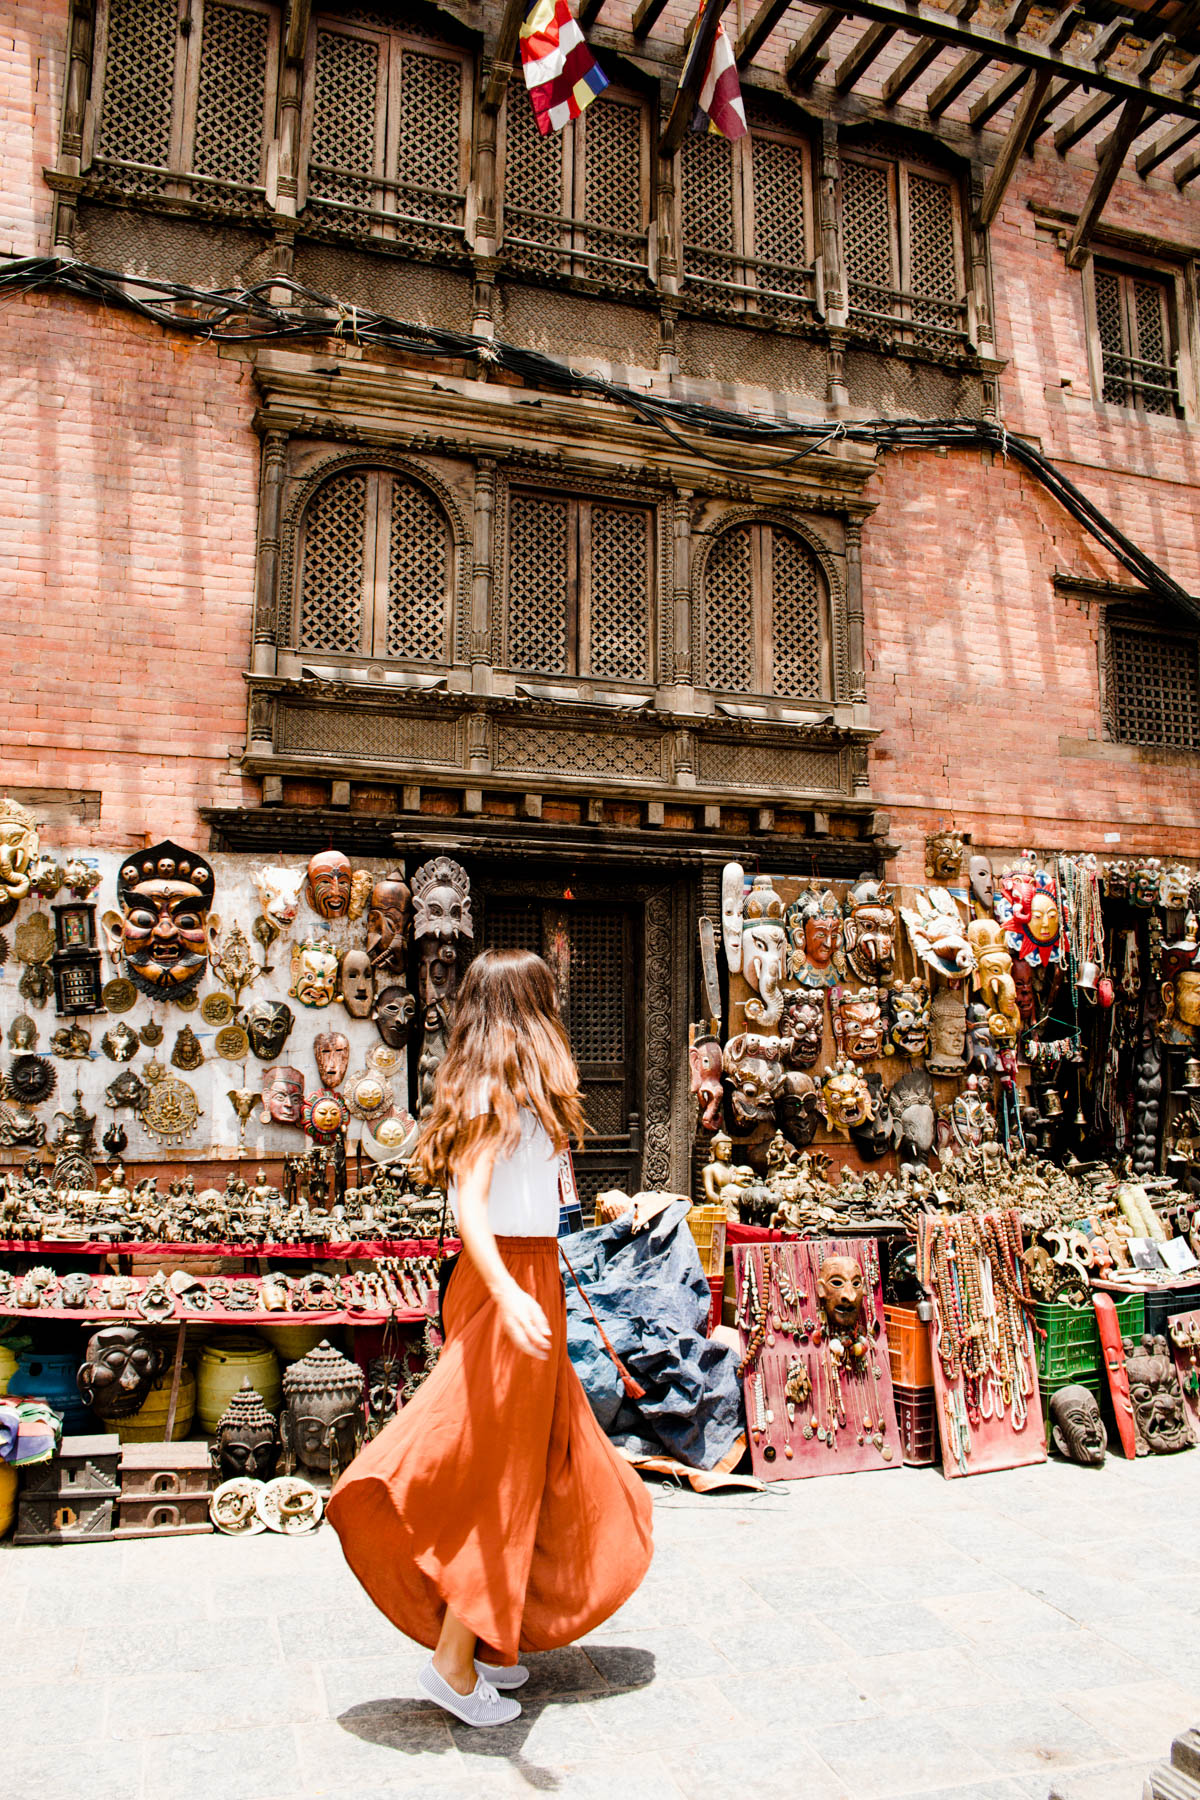 Kathmandu is equal parts intoxicating and exhausting — the people, the foods, the traffic and temples make for an overwhelming and oh-so exciting experience! This is our list of absolute must-do’s while visiting Kathmandu!